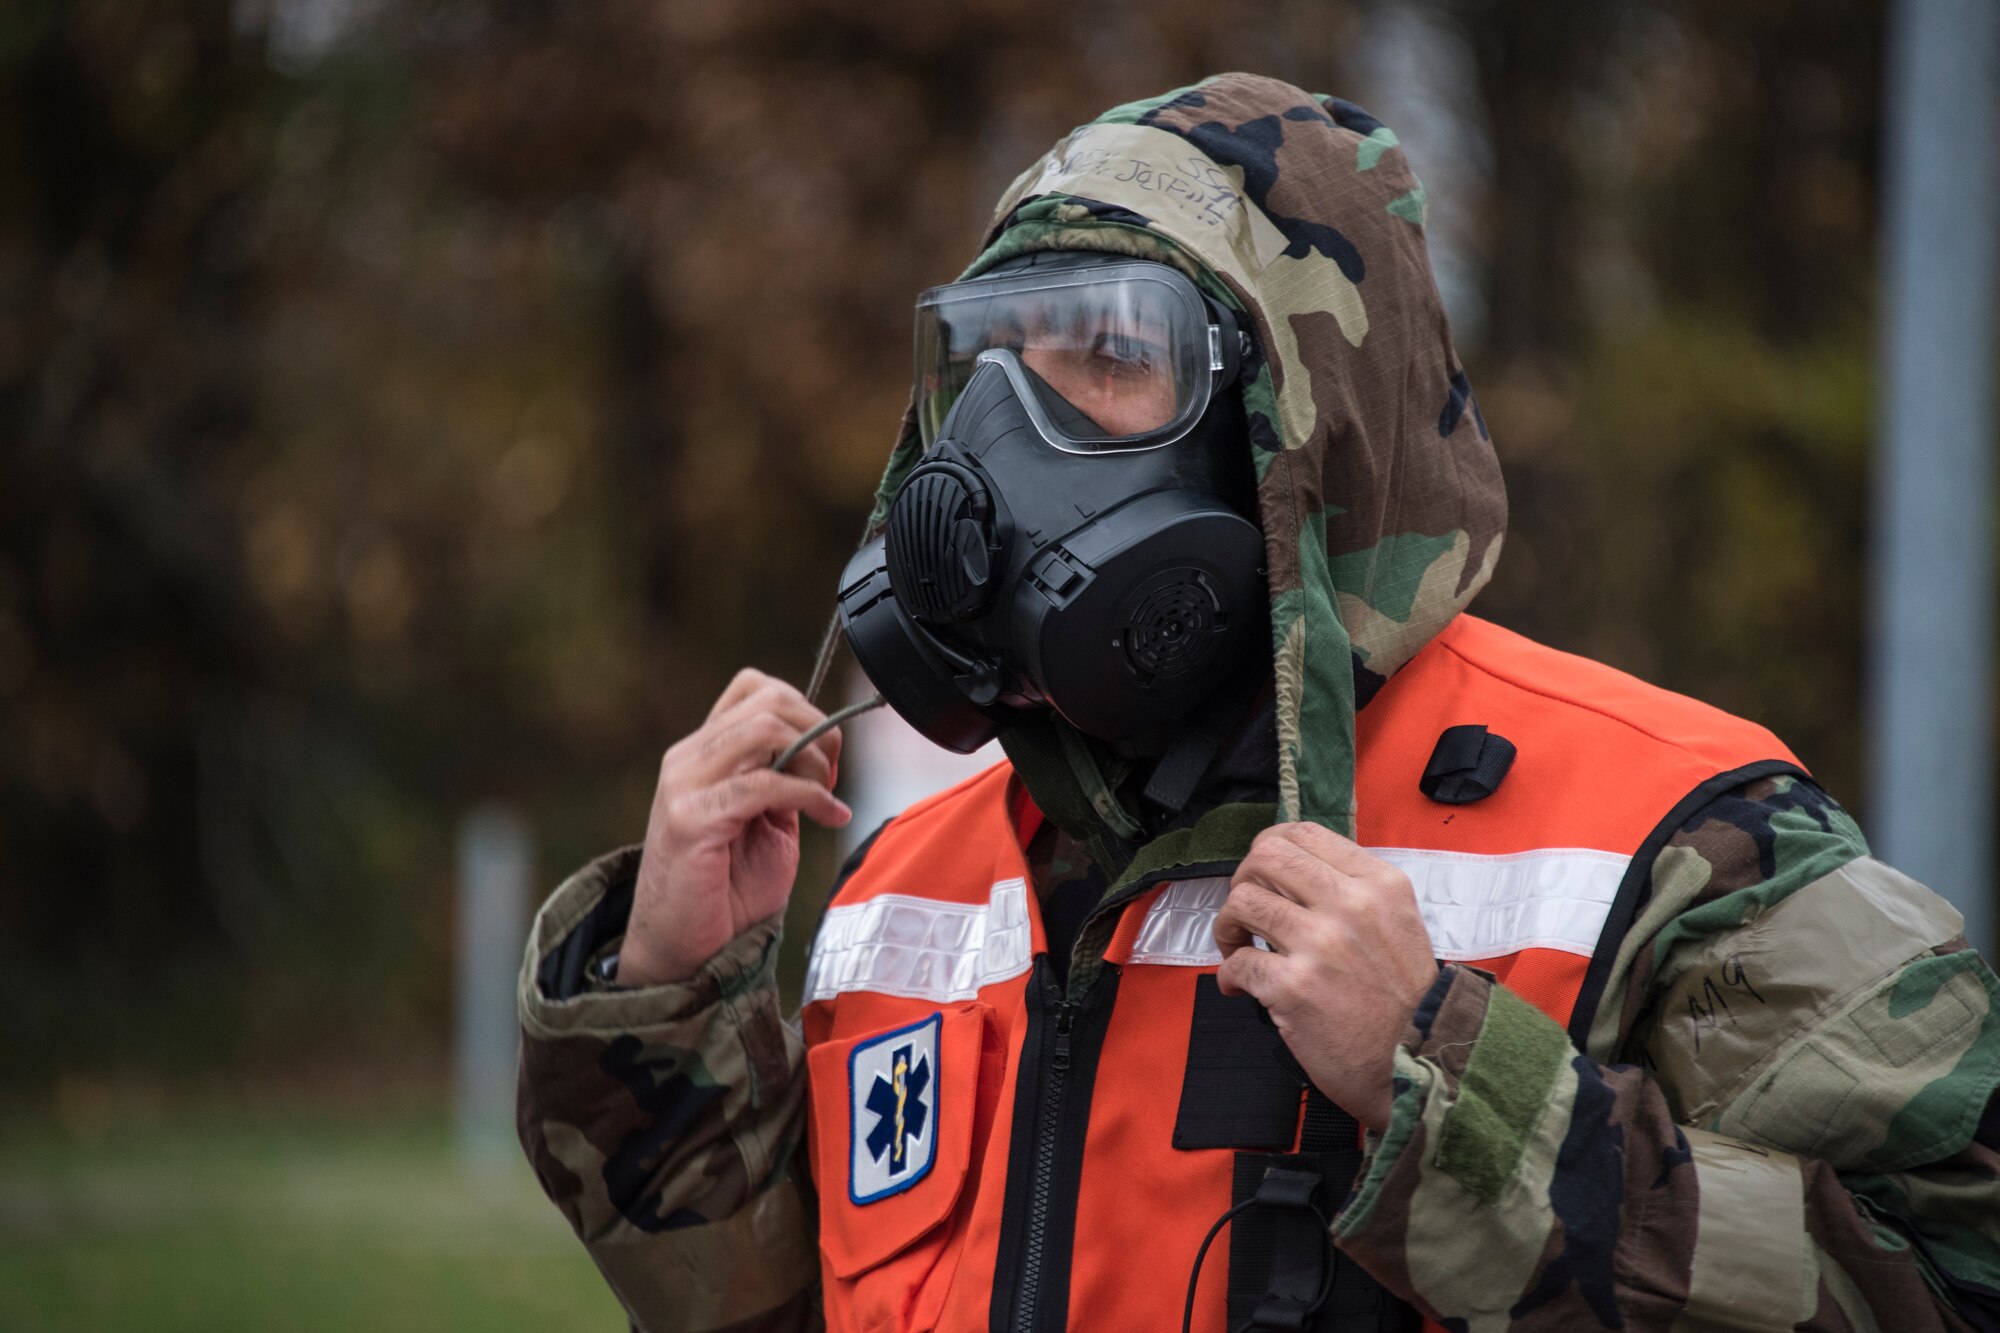 U.S. Air Force Staff Sgt. Joseph Lindgren, 52nd Dental Clinic technician, puts on chemical training gear before assisting with patient decontamination during an exercise at Spangdahlem Air Base, Germany, Nov. 17, 2020. Exercise mock patients are decontaminated before being moved into the medical clinic for further treatment. (U.S. Air Force photo by Senior Airman Chance D. Nardone)